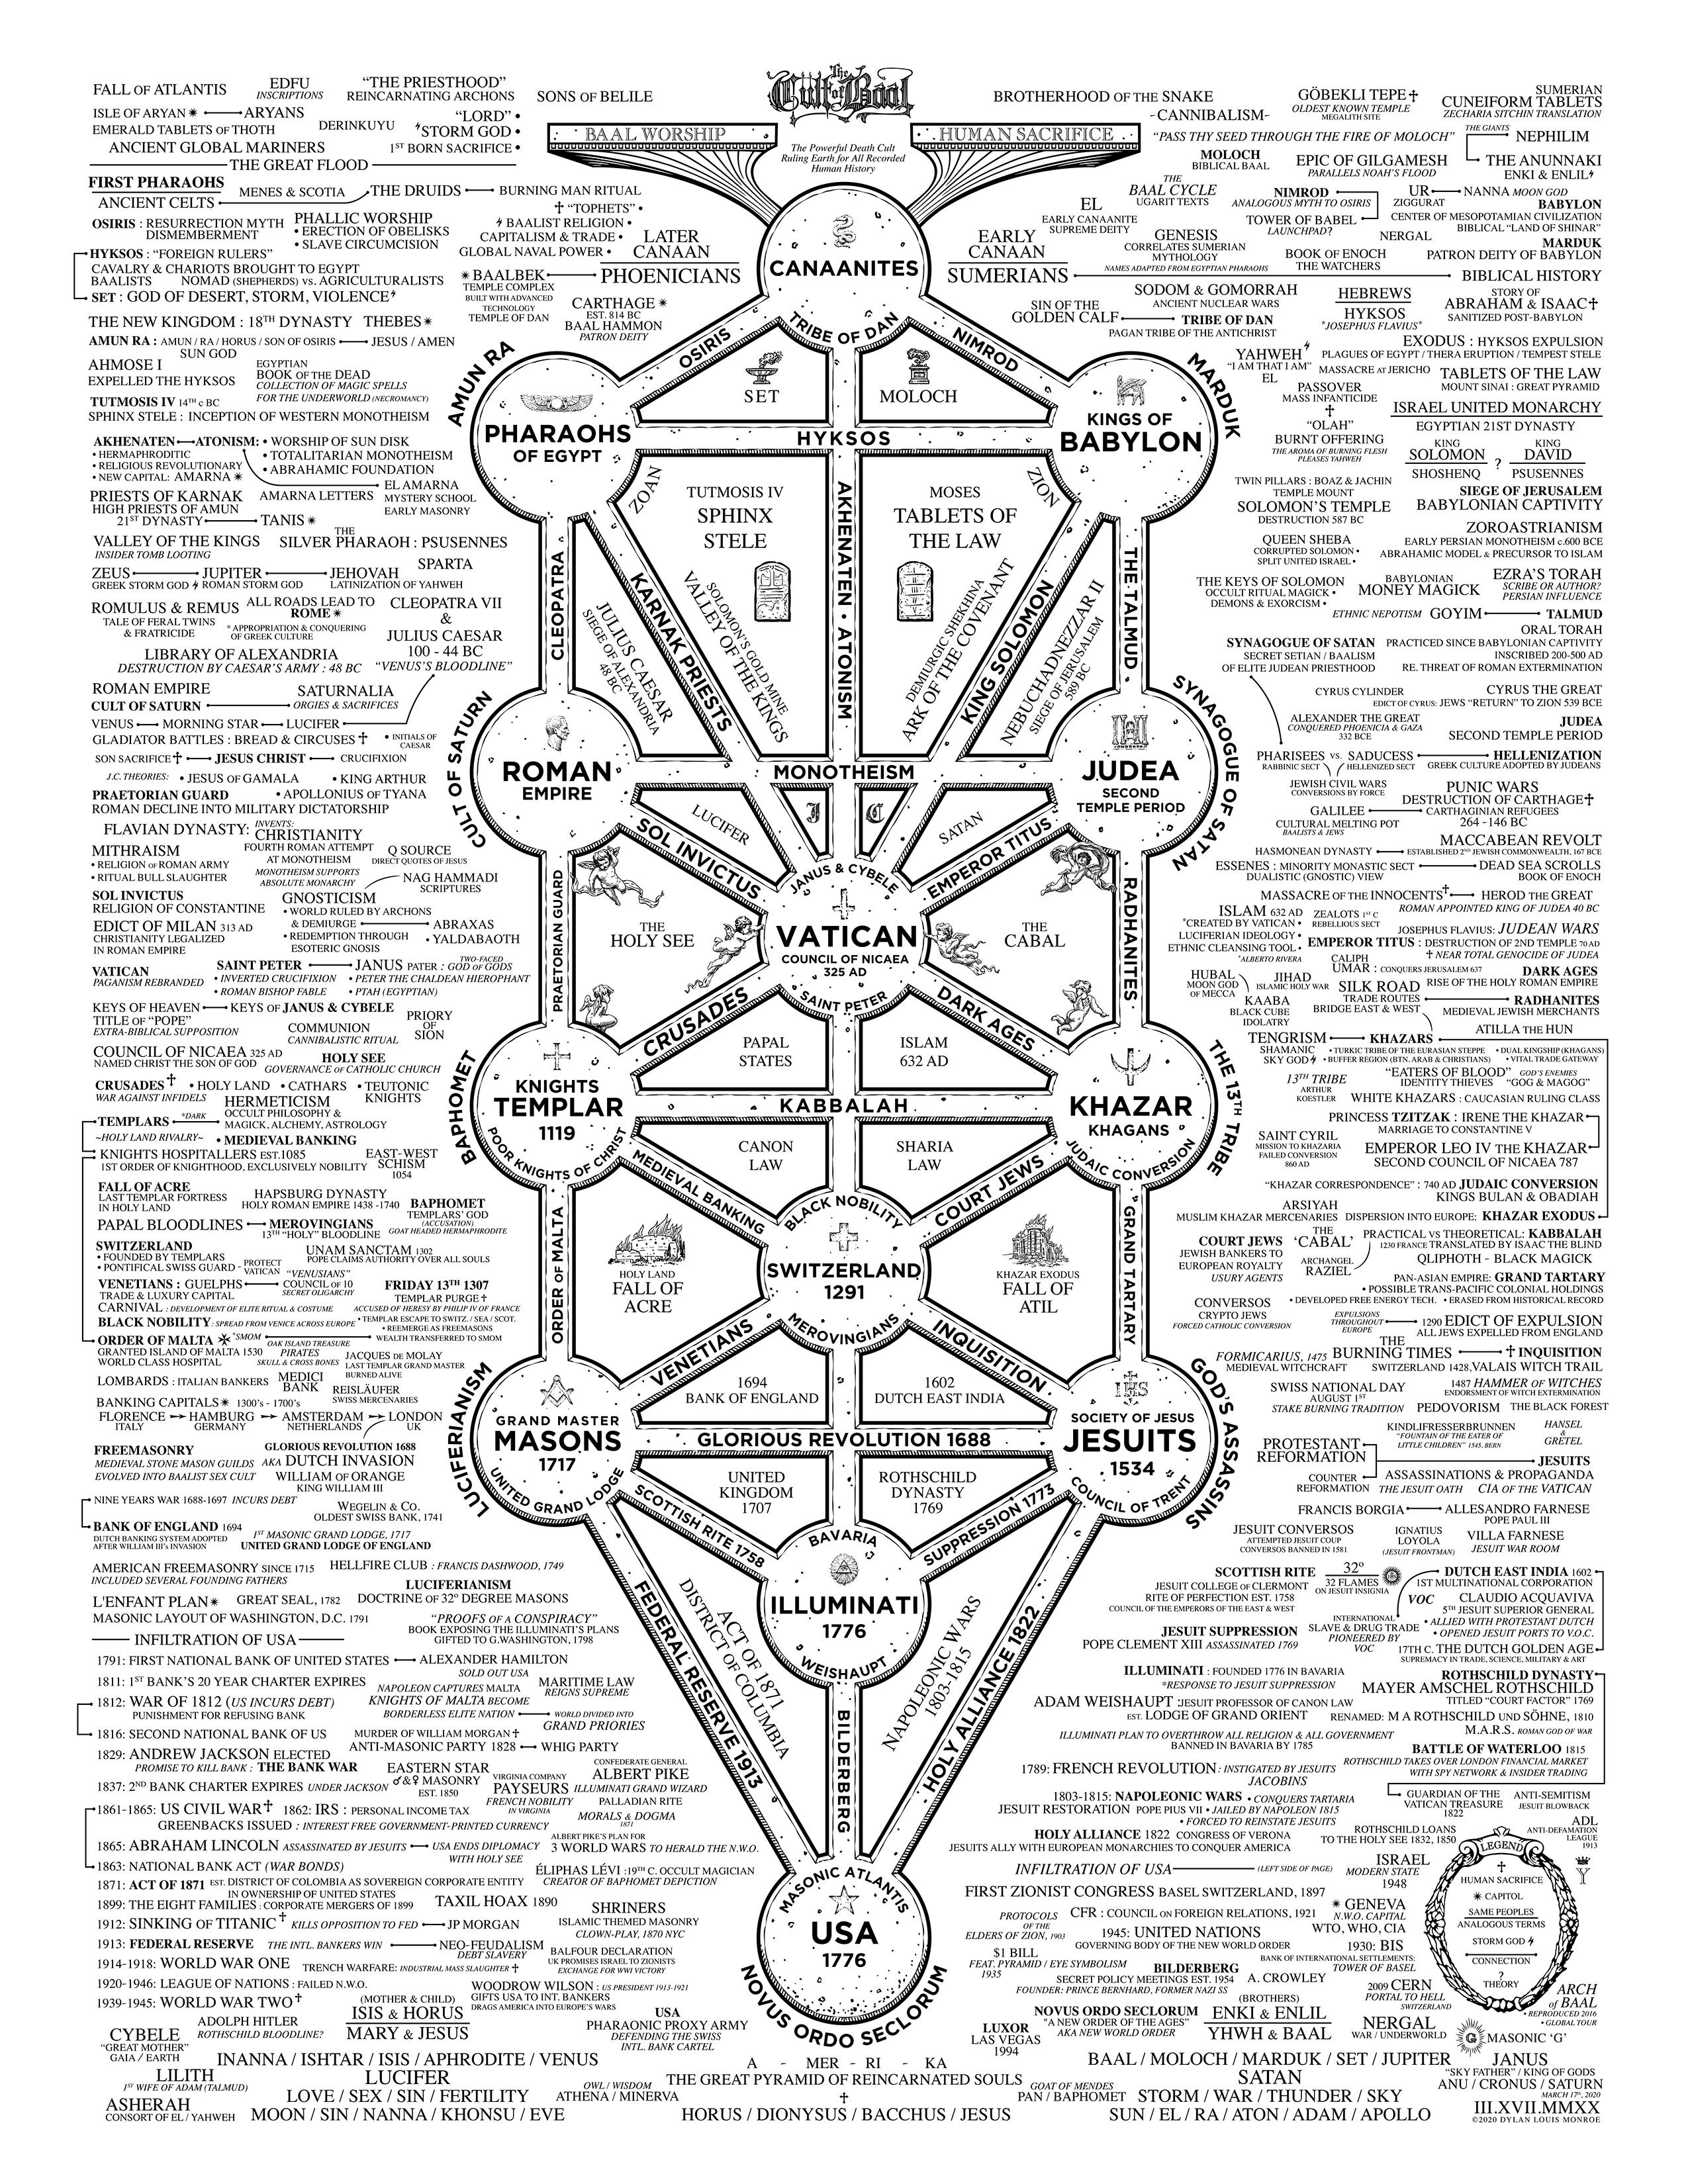 Conspiracy-theory-qanon-map-everything-is-connected-god-concept.jpeg